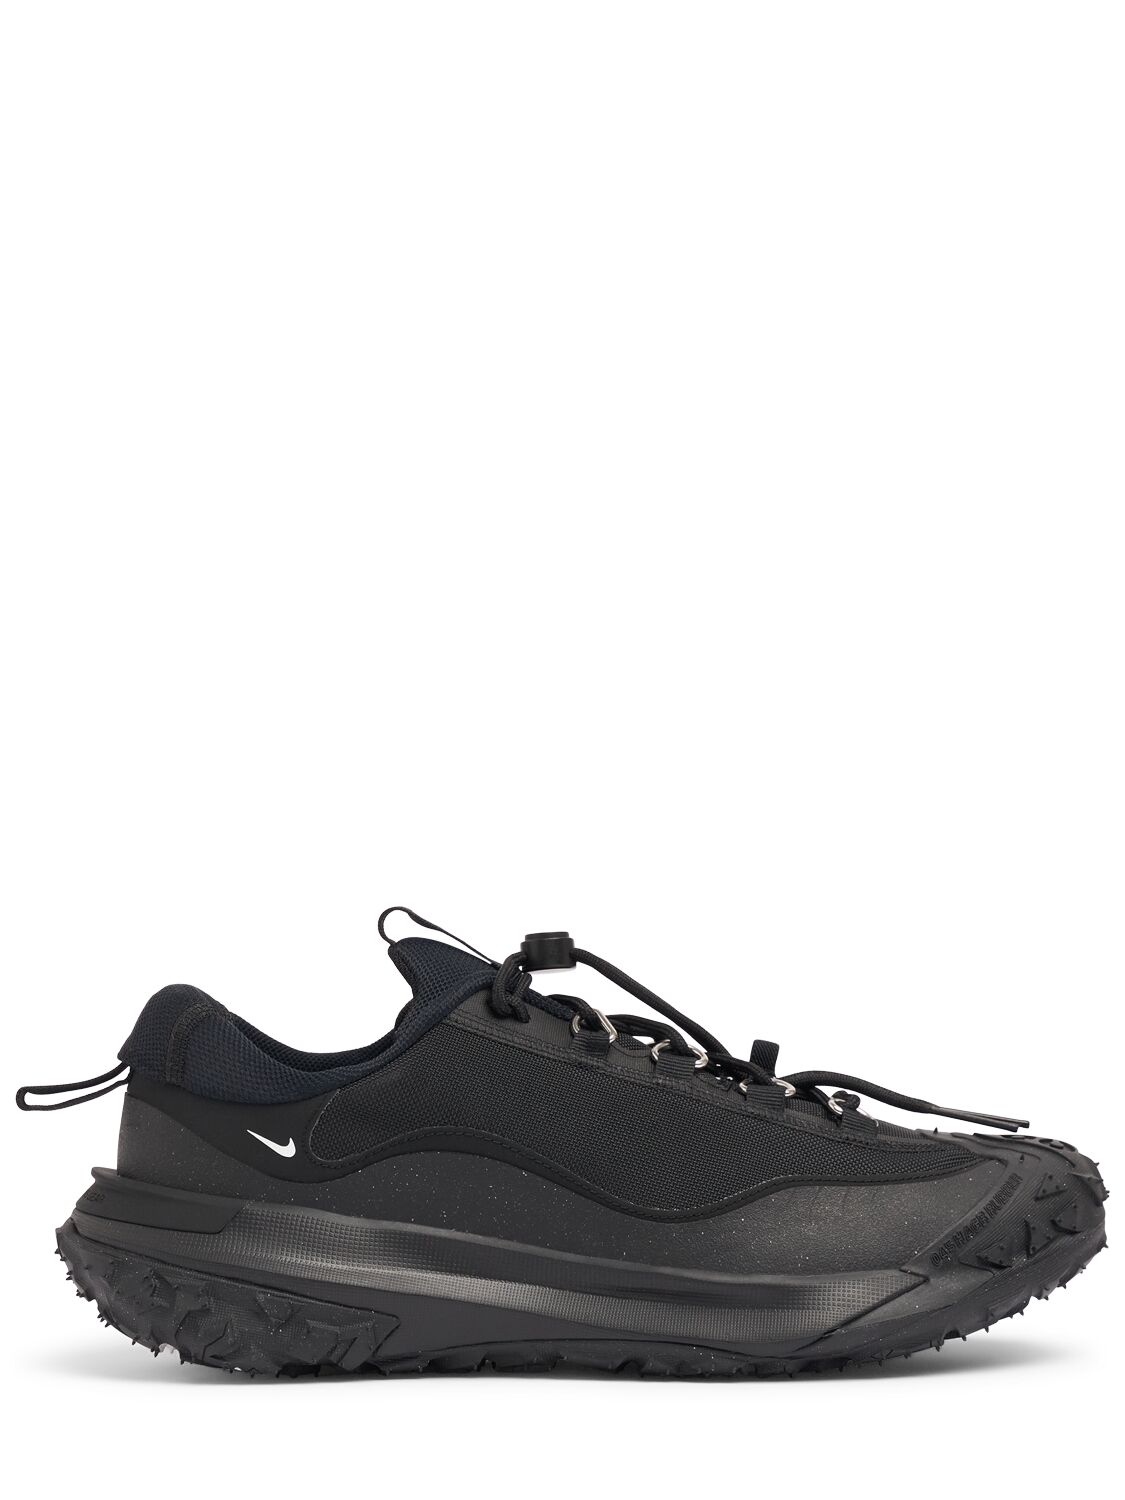 Image of Nike Acg Mountain Fly 2 Low Sneakers